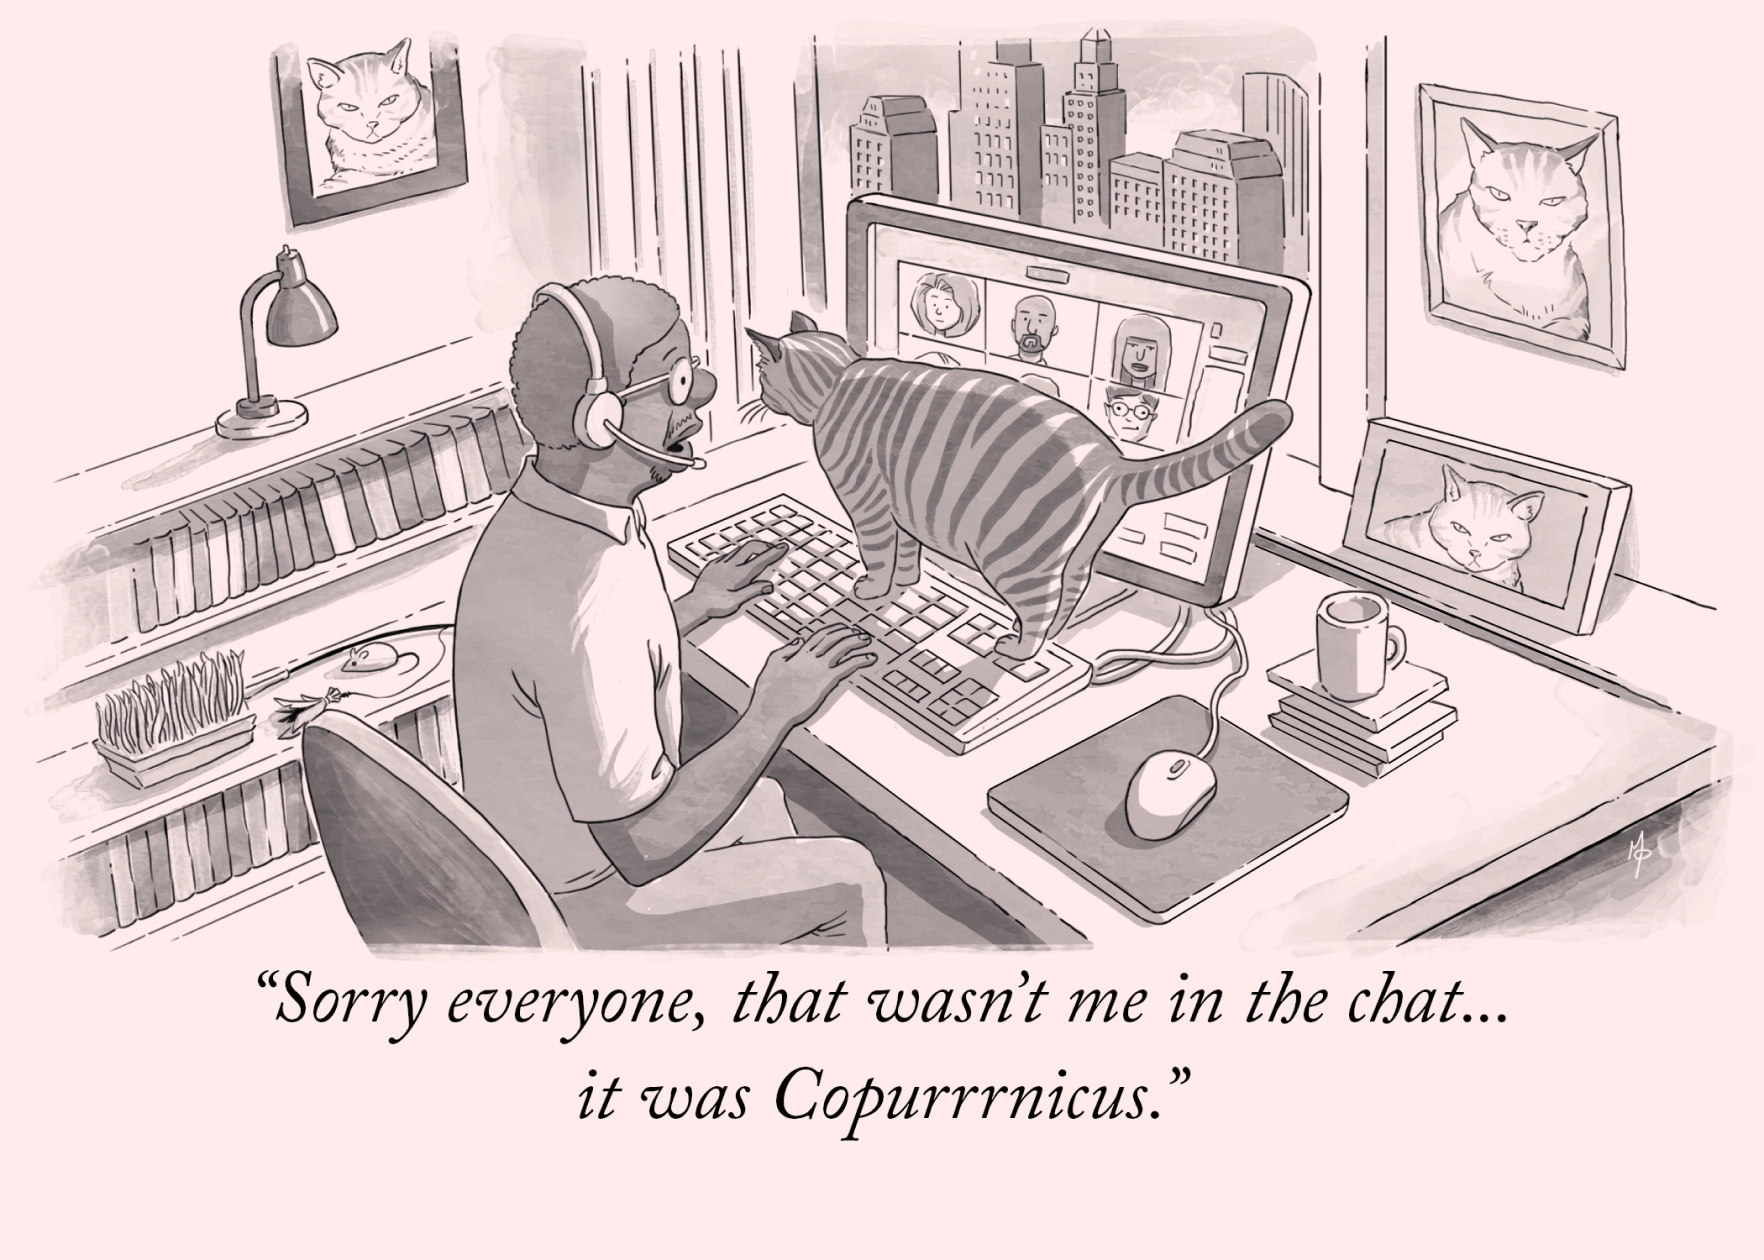 A cartoon-style illustration of a man having a video call meeting. He is wearing a headset. His screen shows six faces of meeting correspondents. He hangs several photos of his cat in the room. The chubby cat is walking cluelessly on the keyboard while blocking his screen. The man says: Sorry everyone, that wasnt me in the chat... it was Copurrnicus.